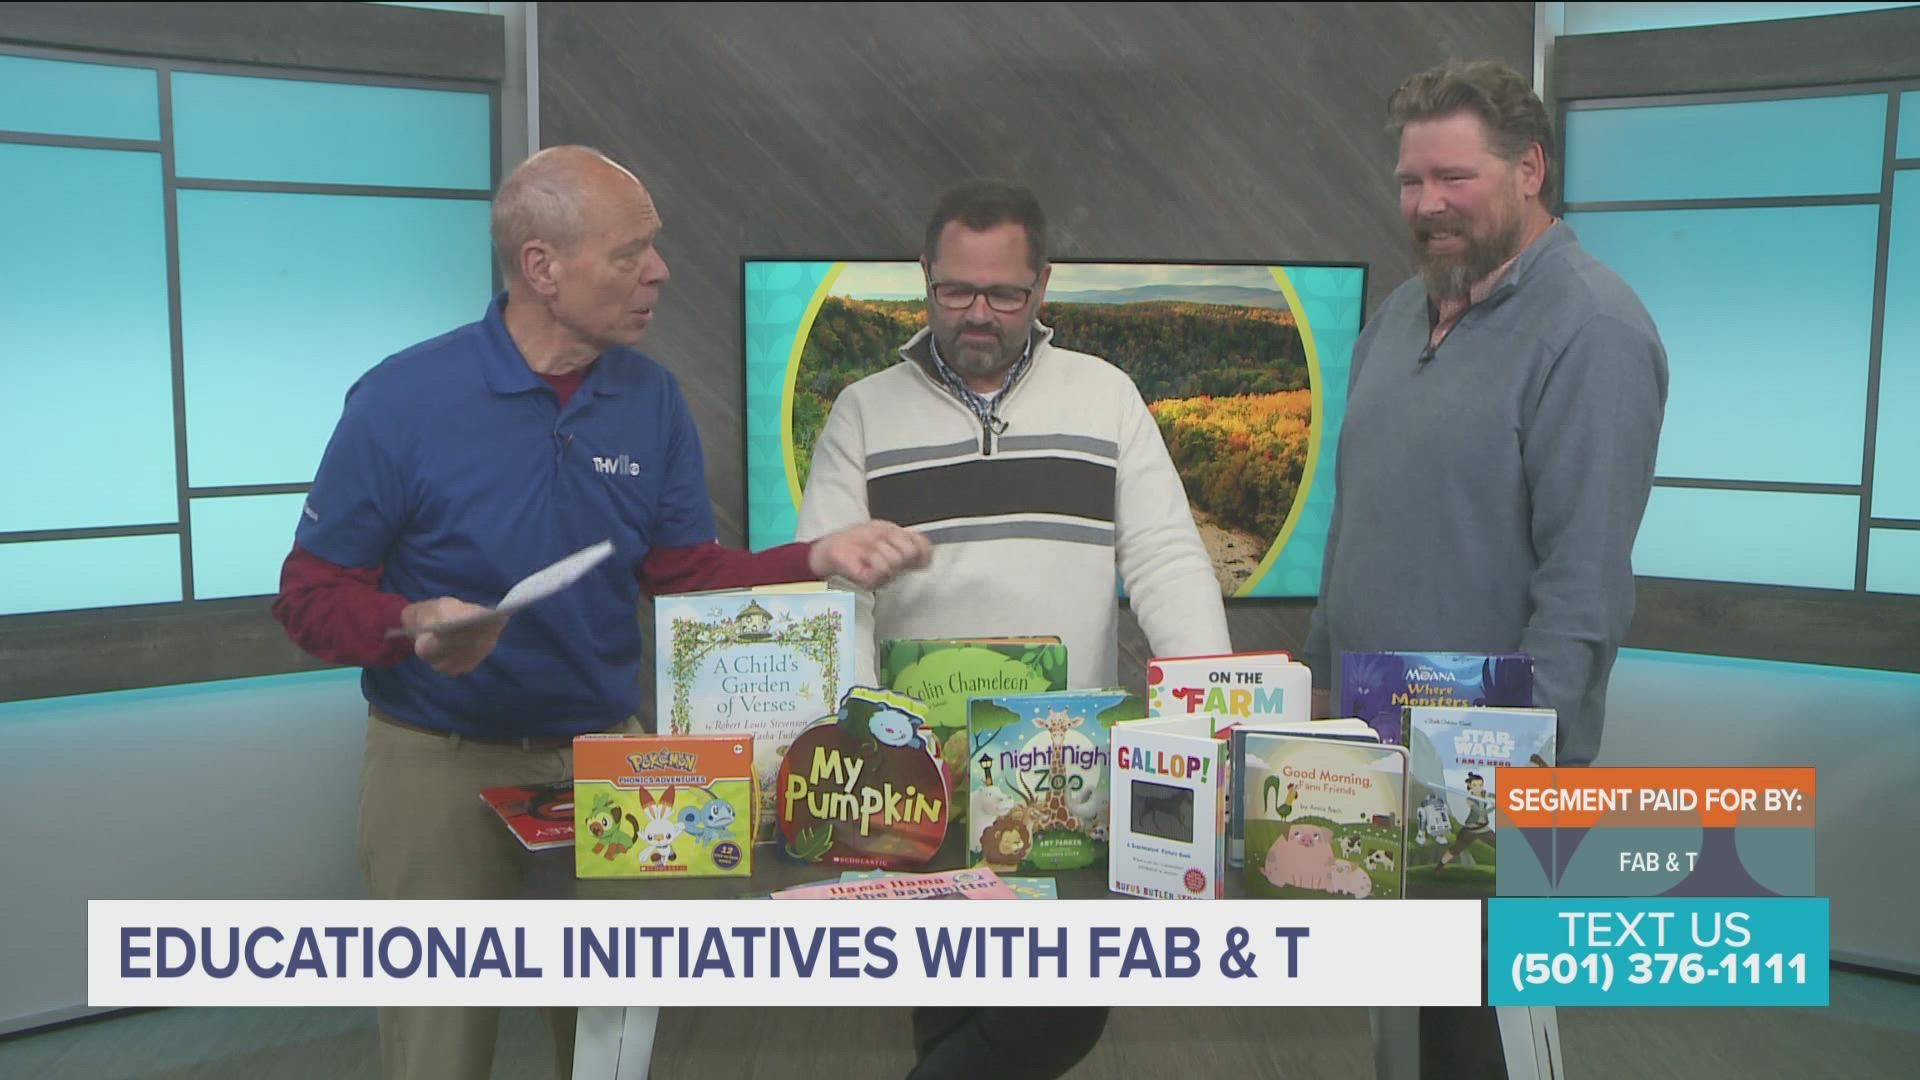 Craig O'Neil teams up with FAB&T for his Reading Road Trip segment.